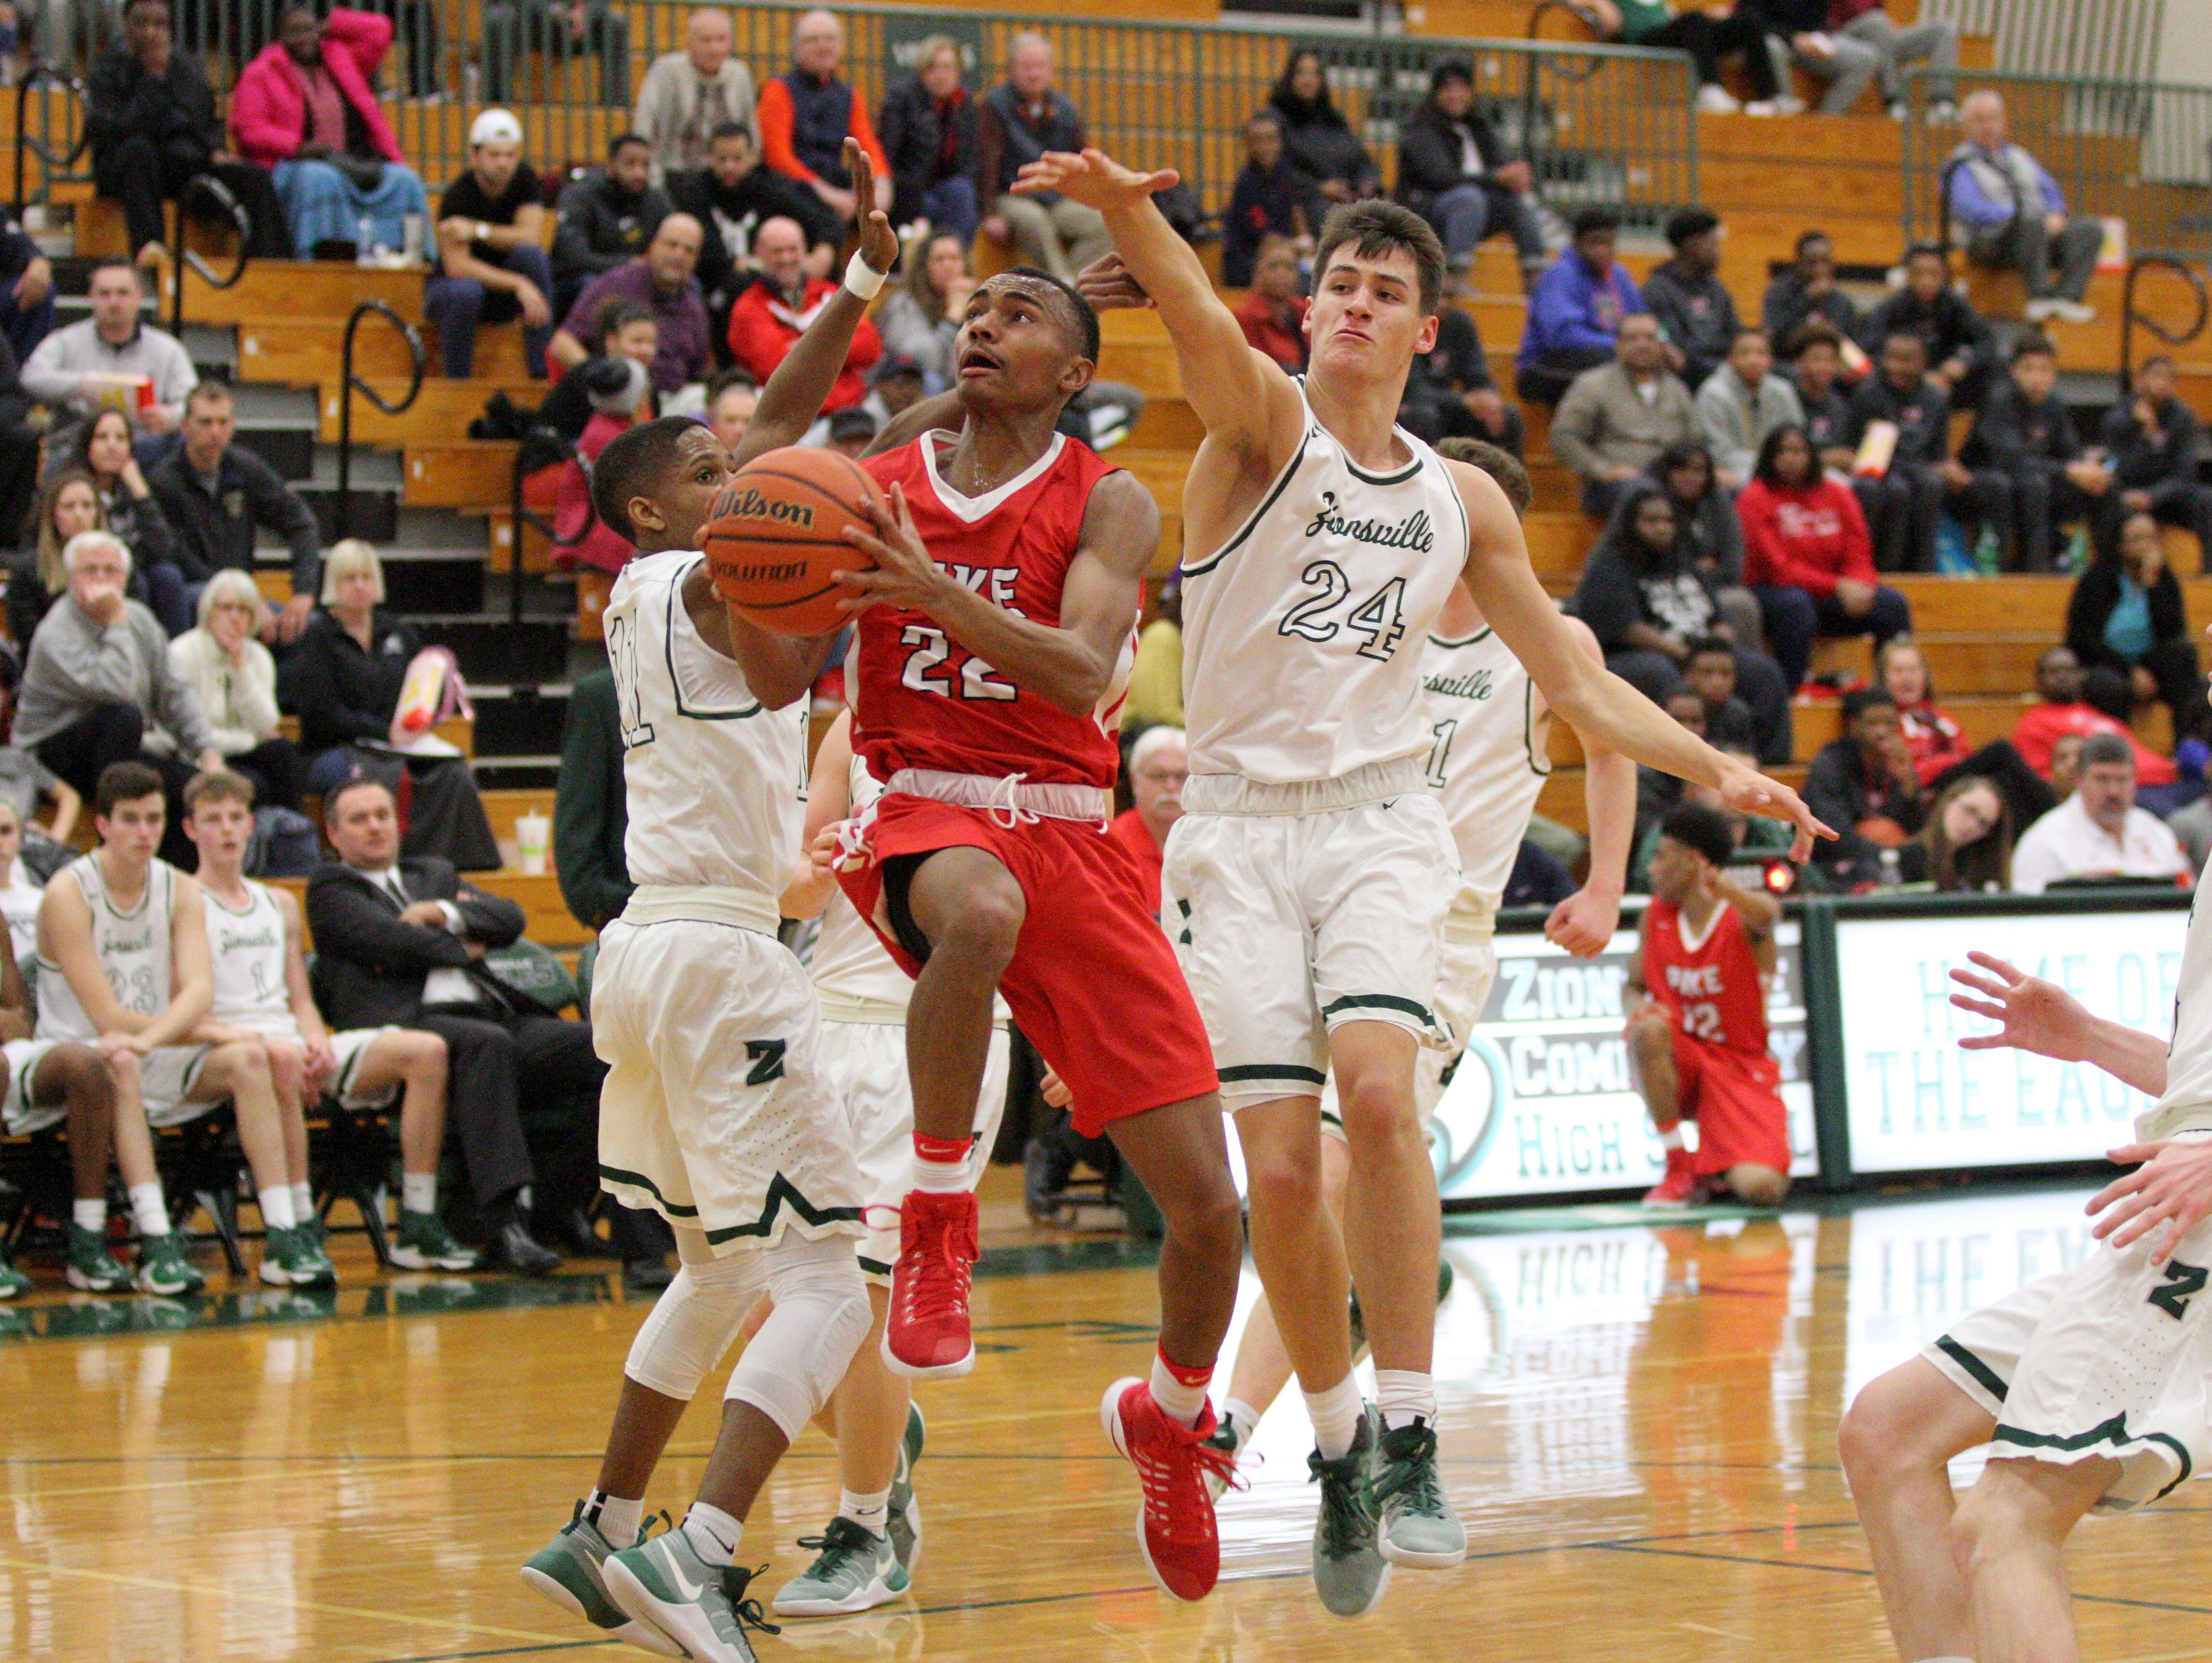 Pike's Elijah Pennington works against Zionsville's defense. Nathan Childress goes for the block.